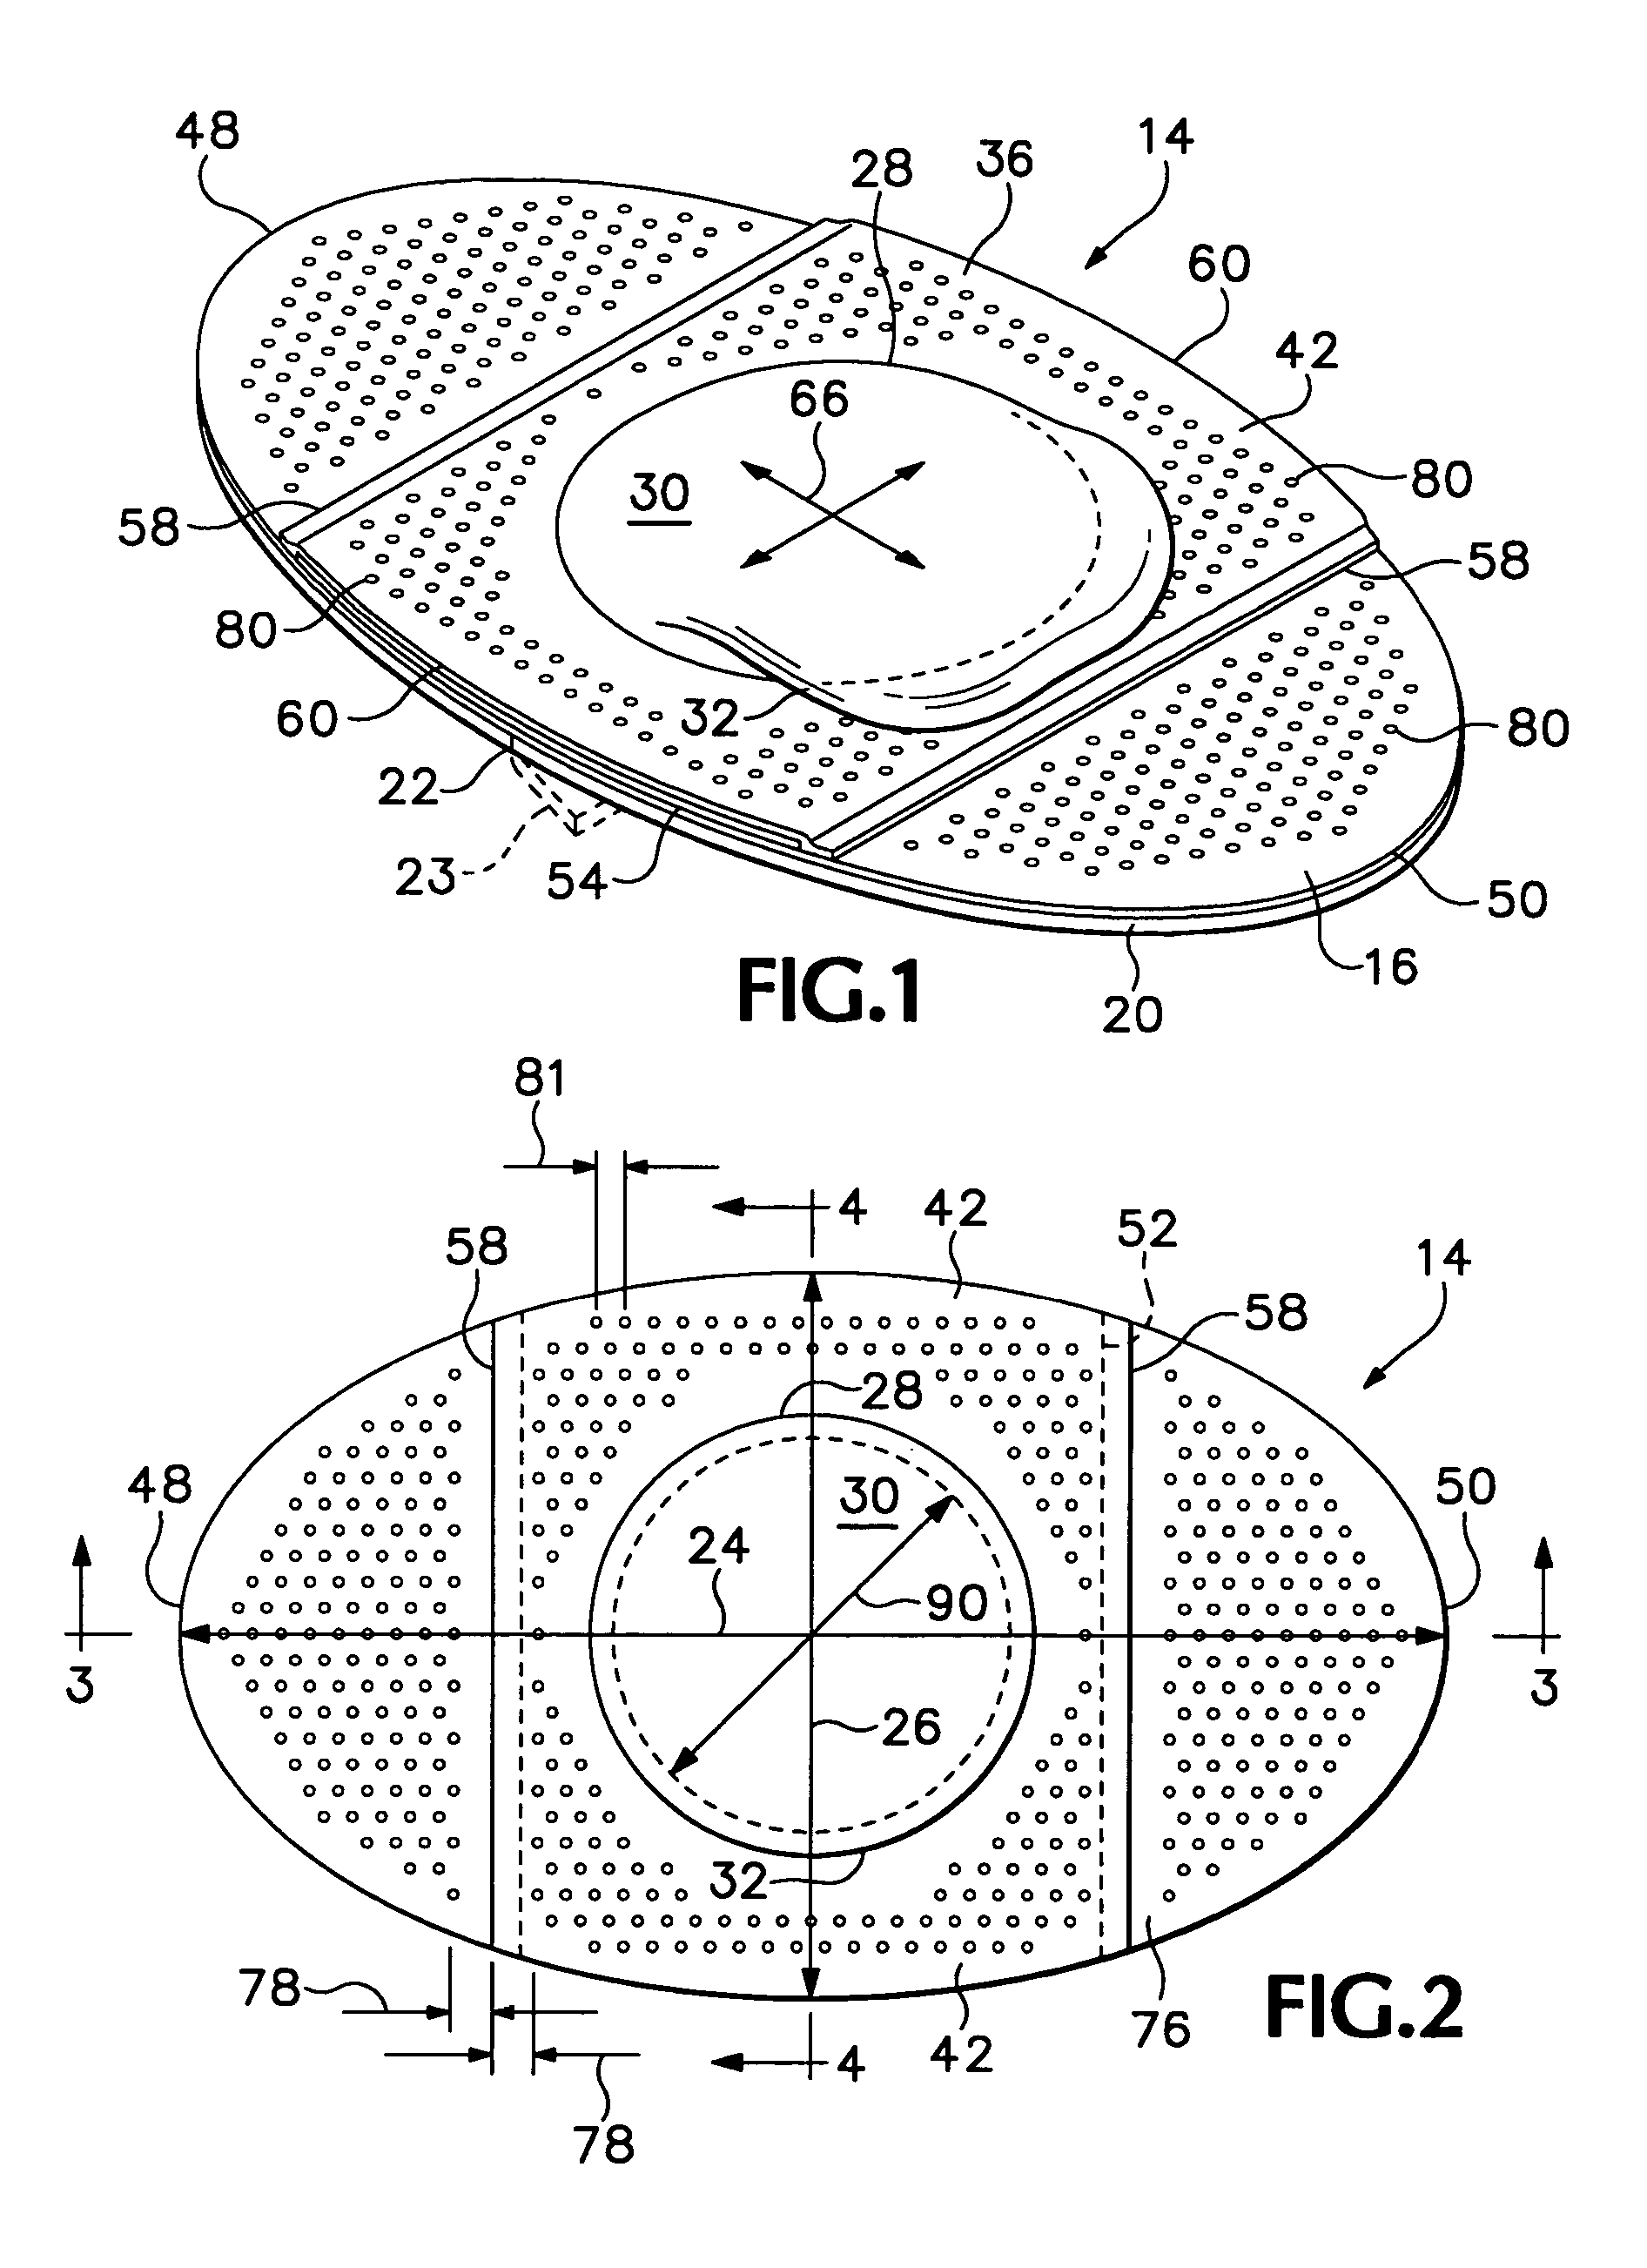 Friction reducing devices